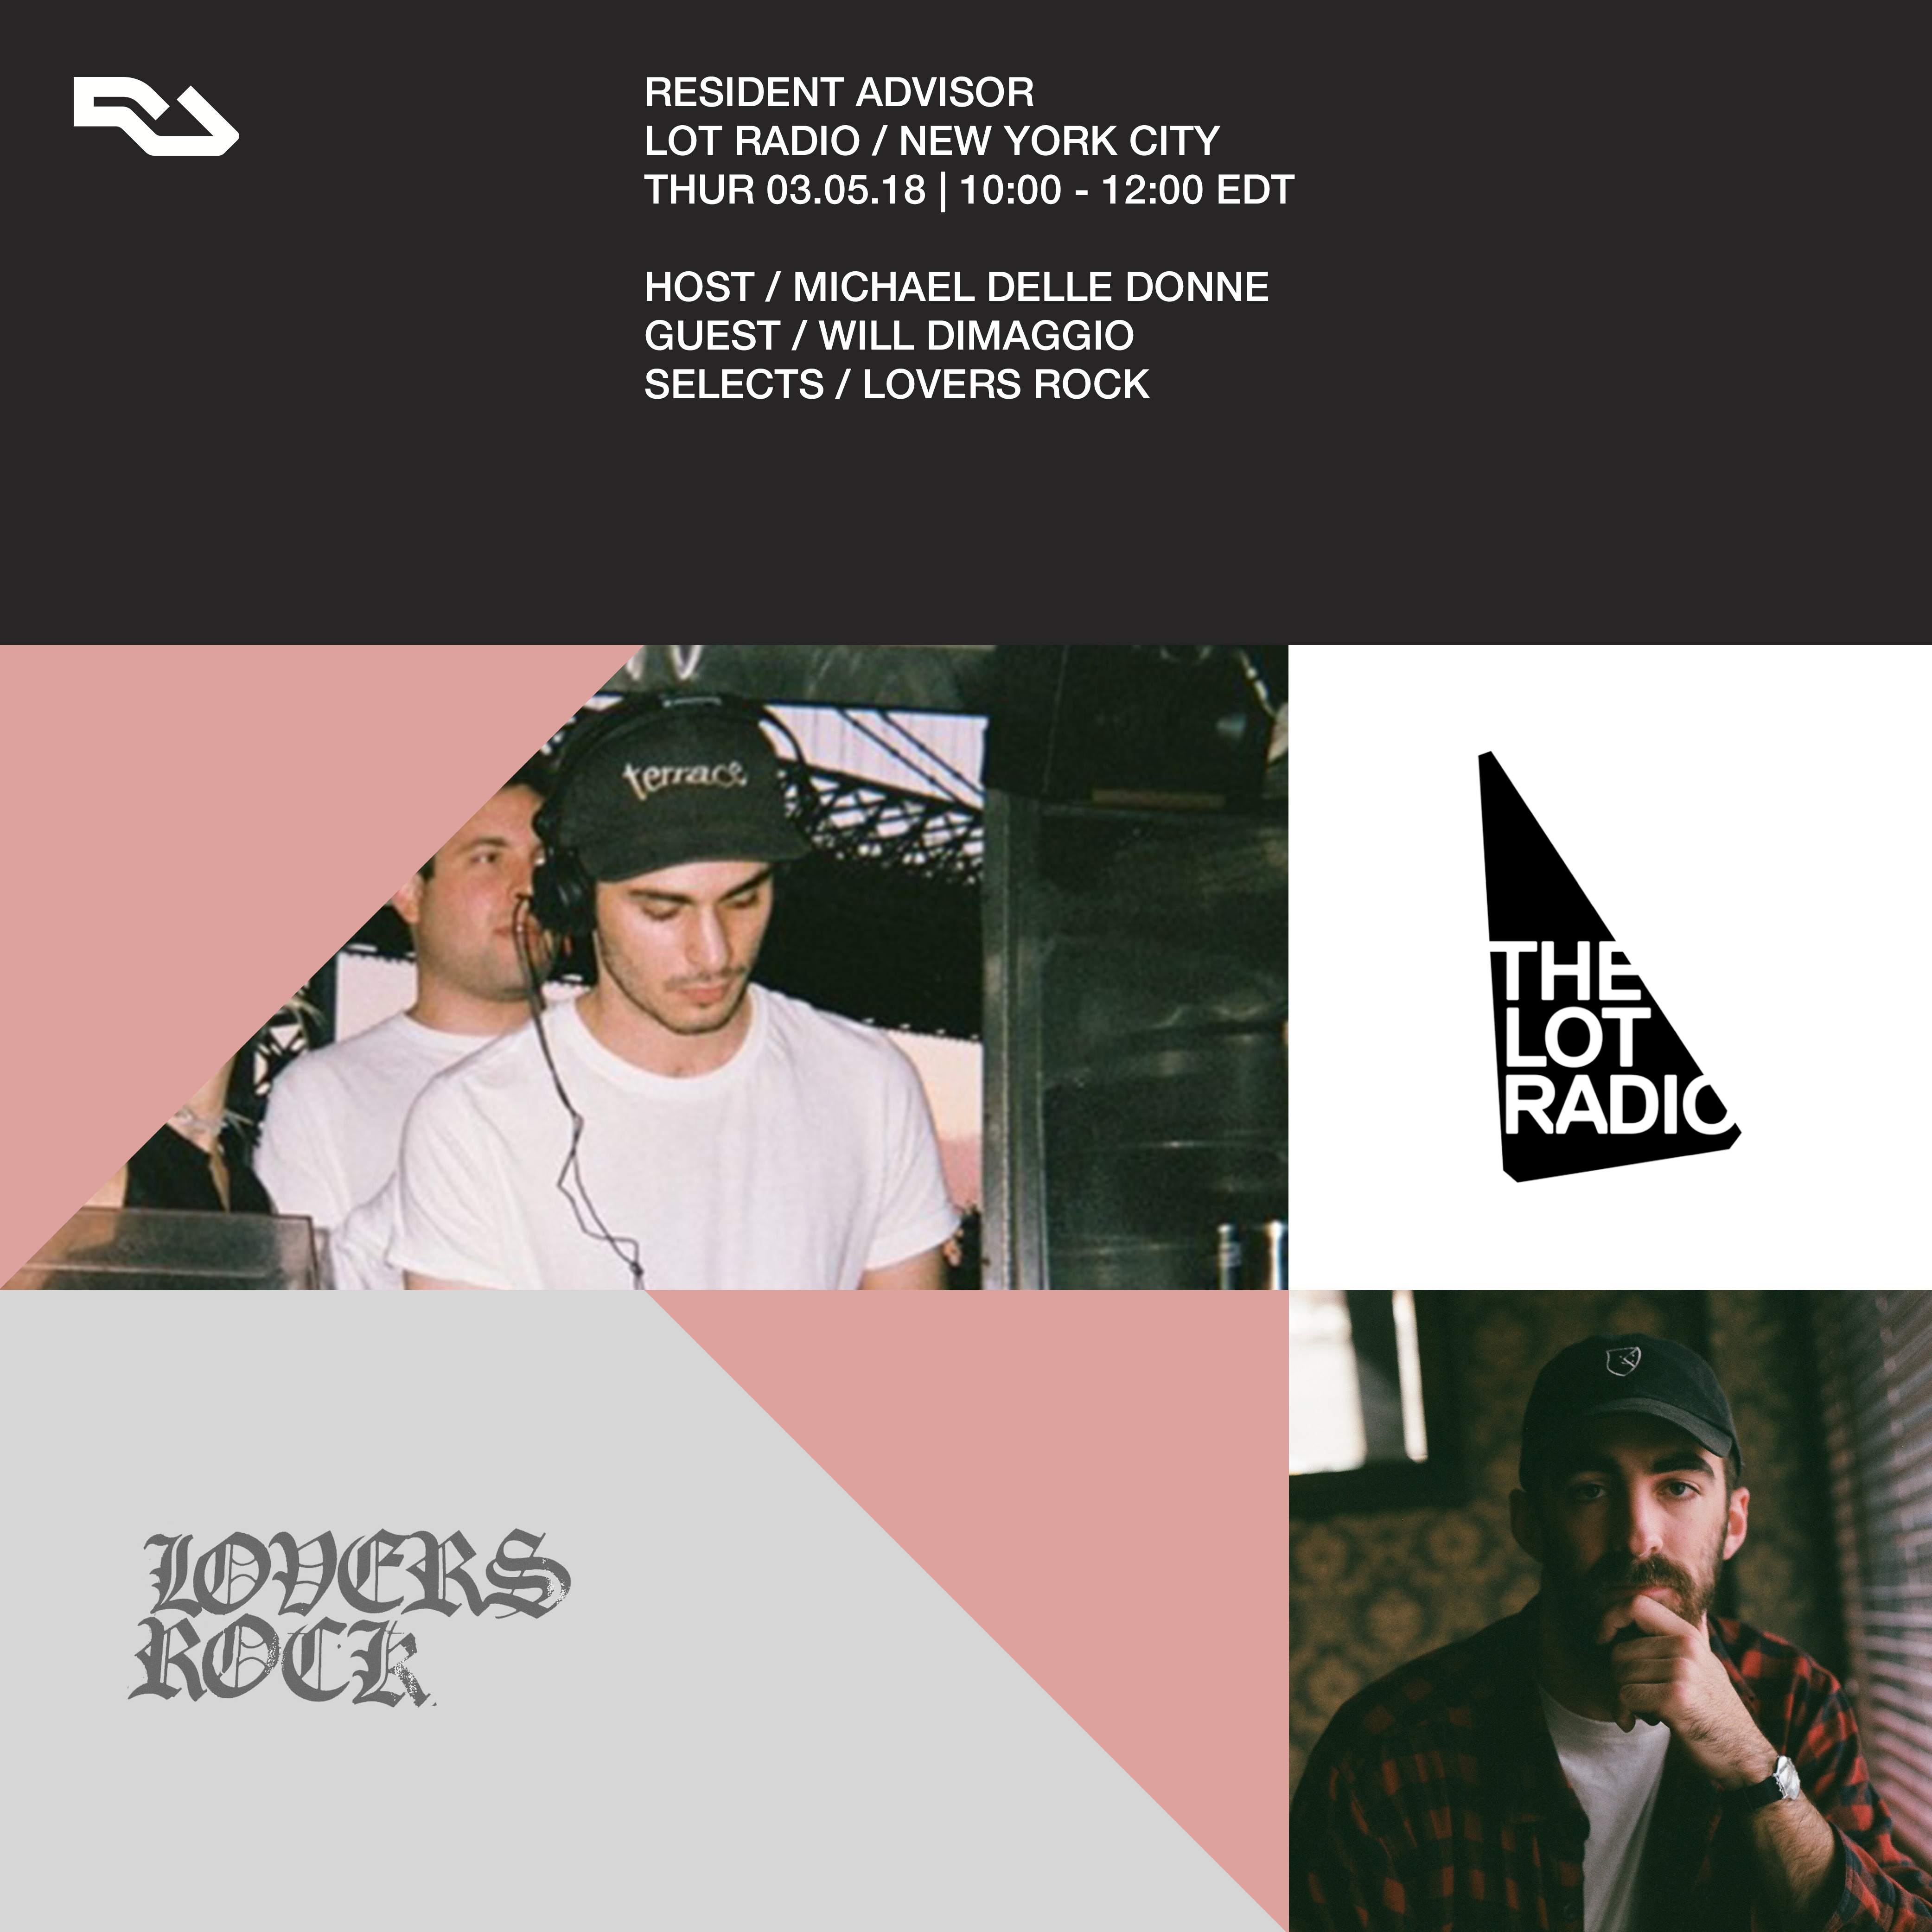 Listen back to RA on The Lot Radio image